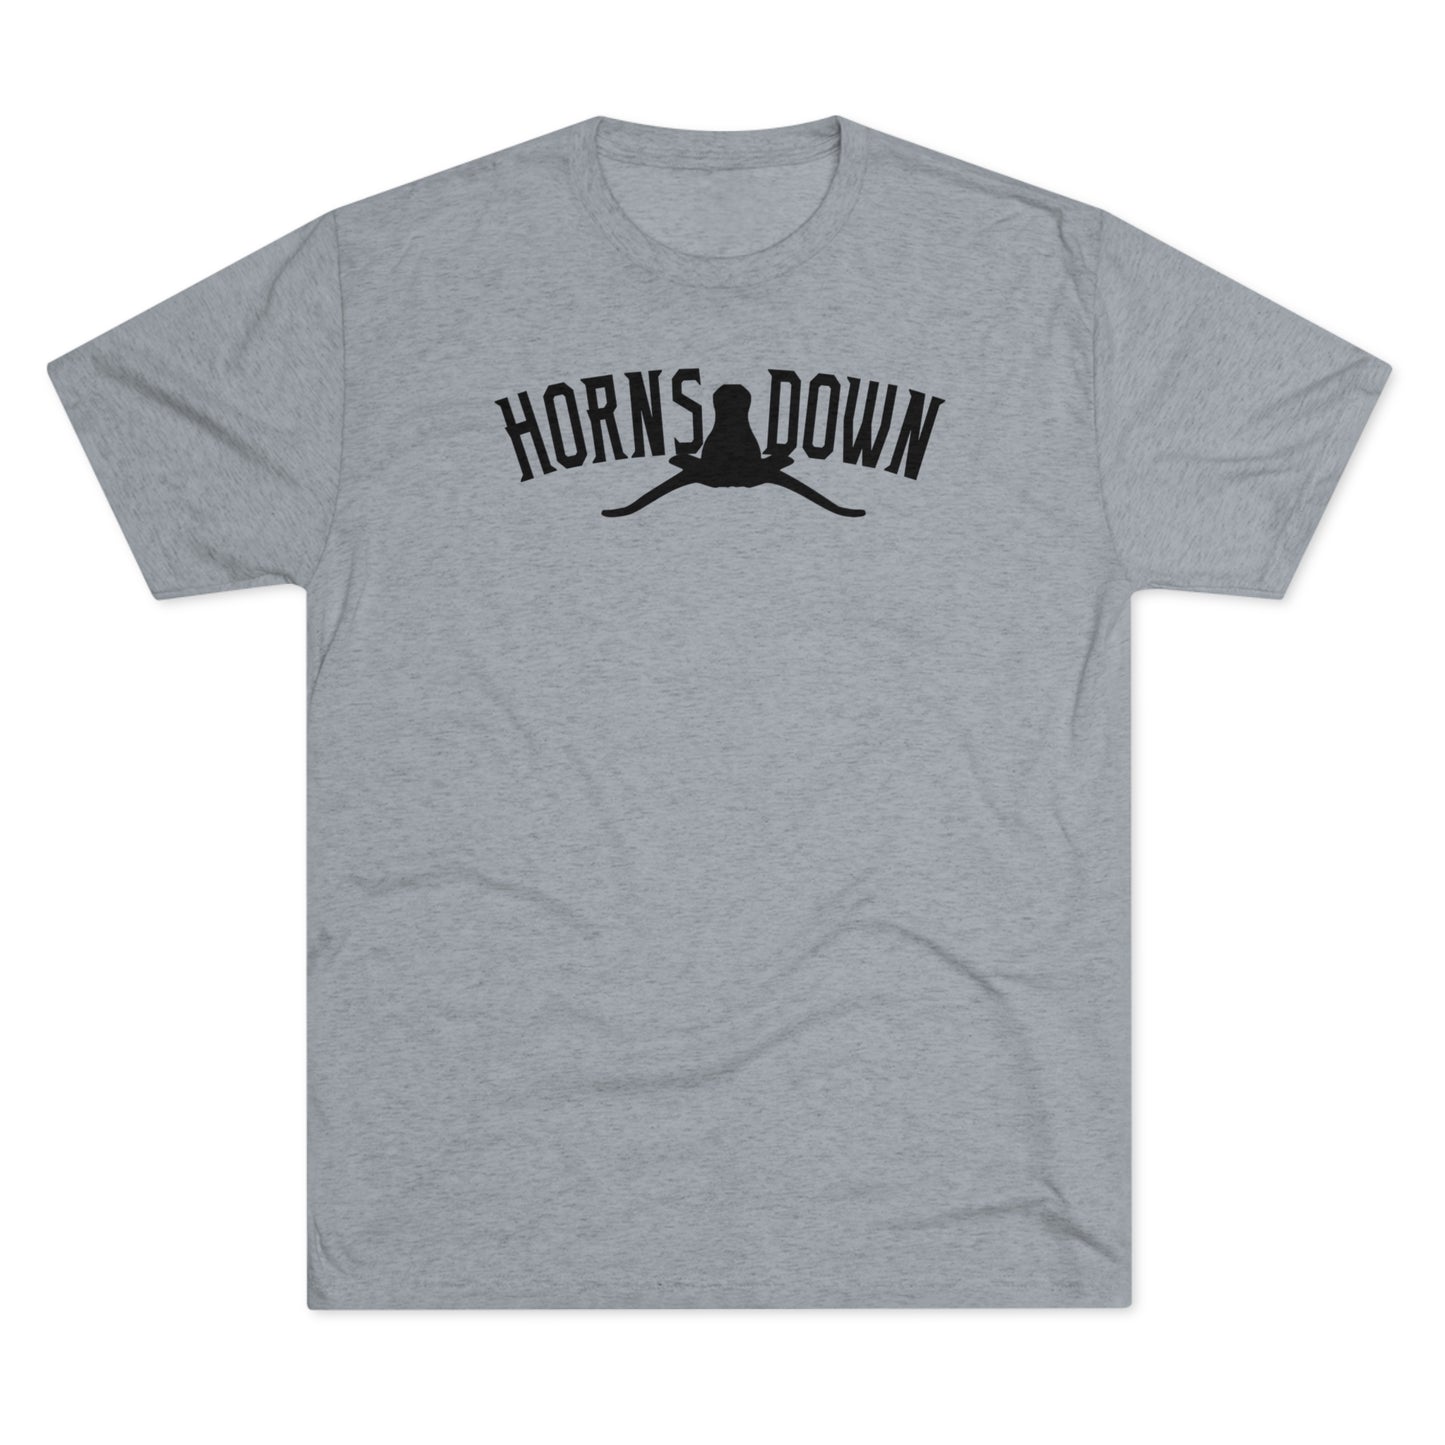 HORNS DOWN (arched type)-Unisex Tri-Blend Crew Tee